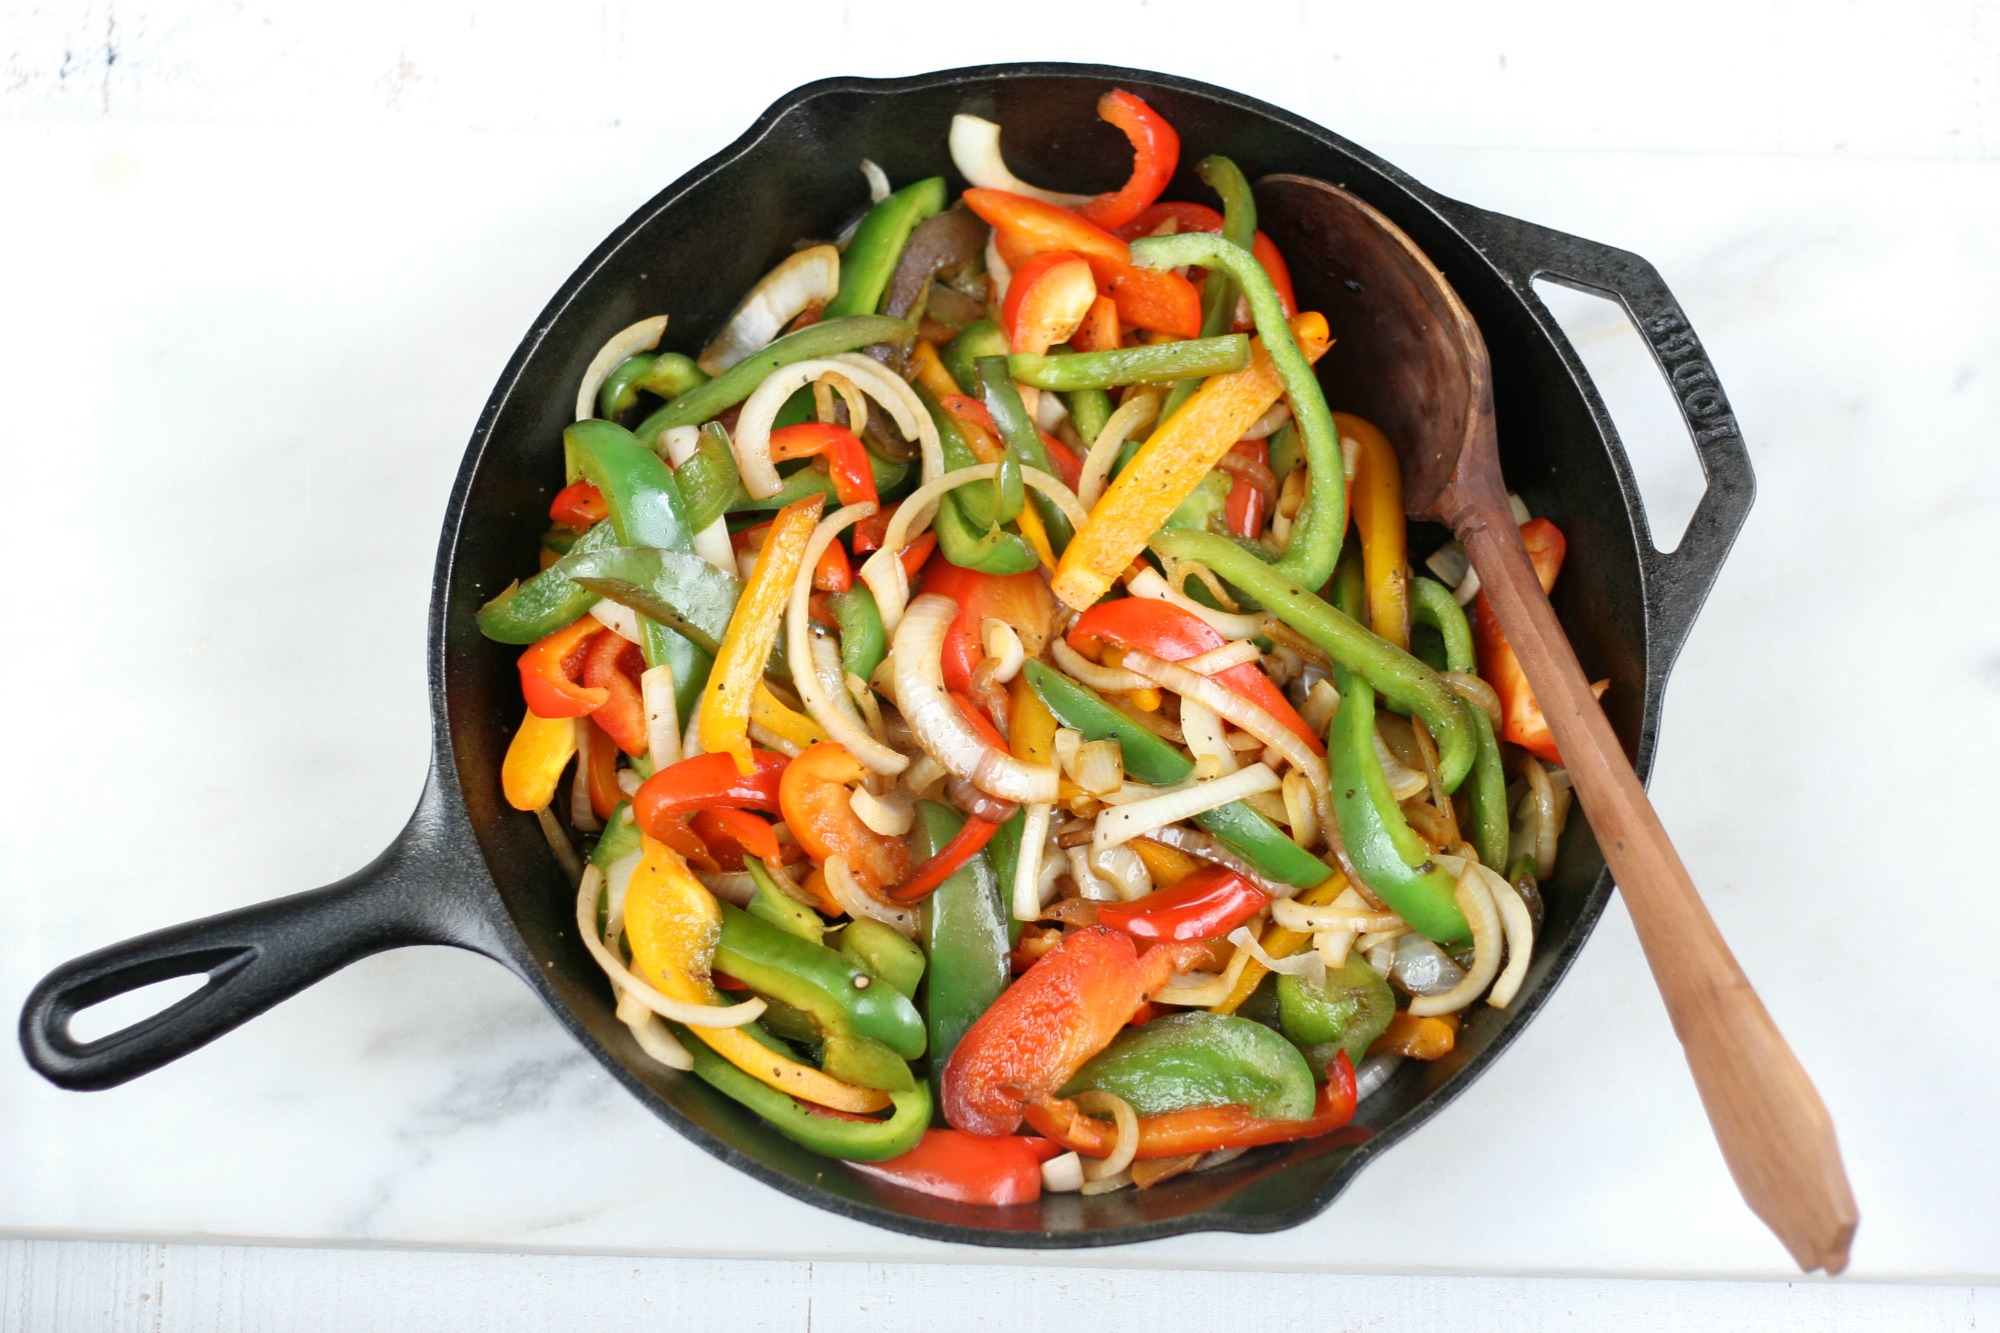 sauteed onions and peppers in a cast iron skillet and hand carved wooden spoon.